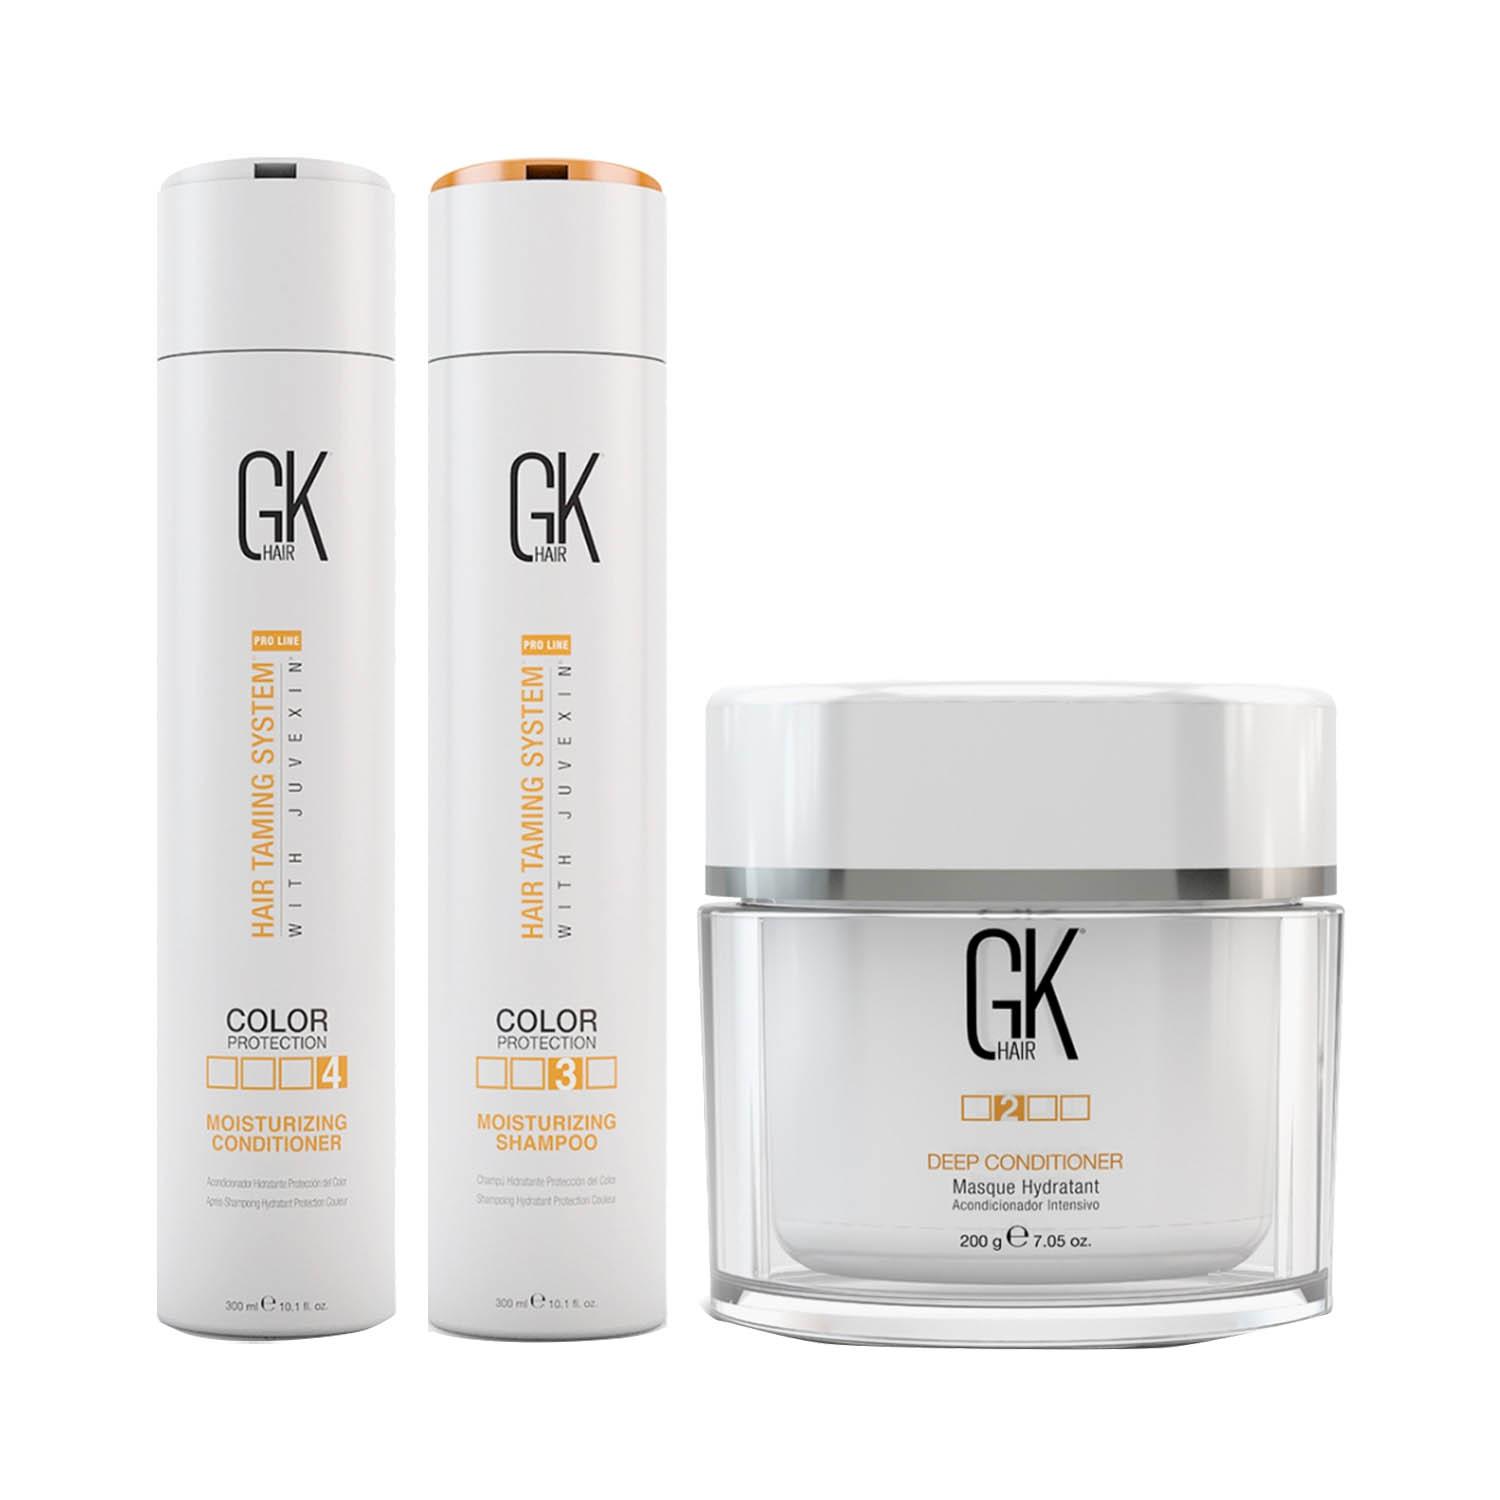 GK Hair | GK Hair Moisturizing Shampoo and Conditioner 300ml with Deep Conditioner Masque 200gm